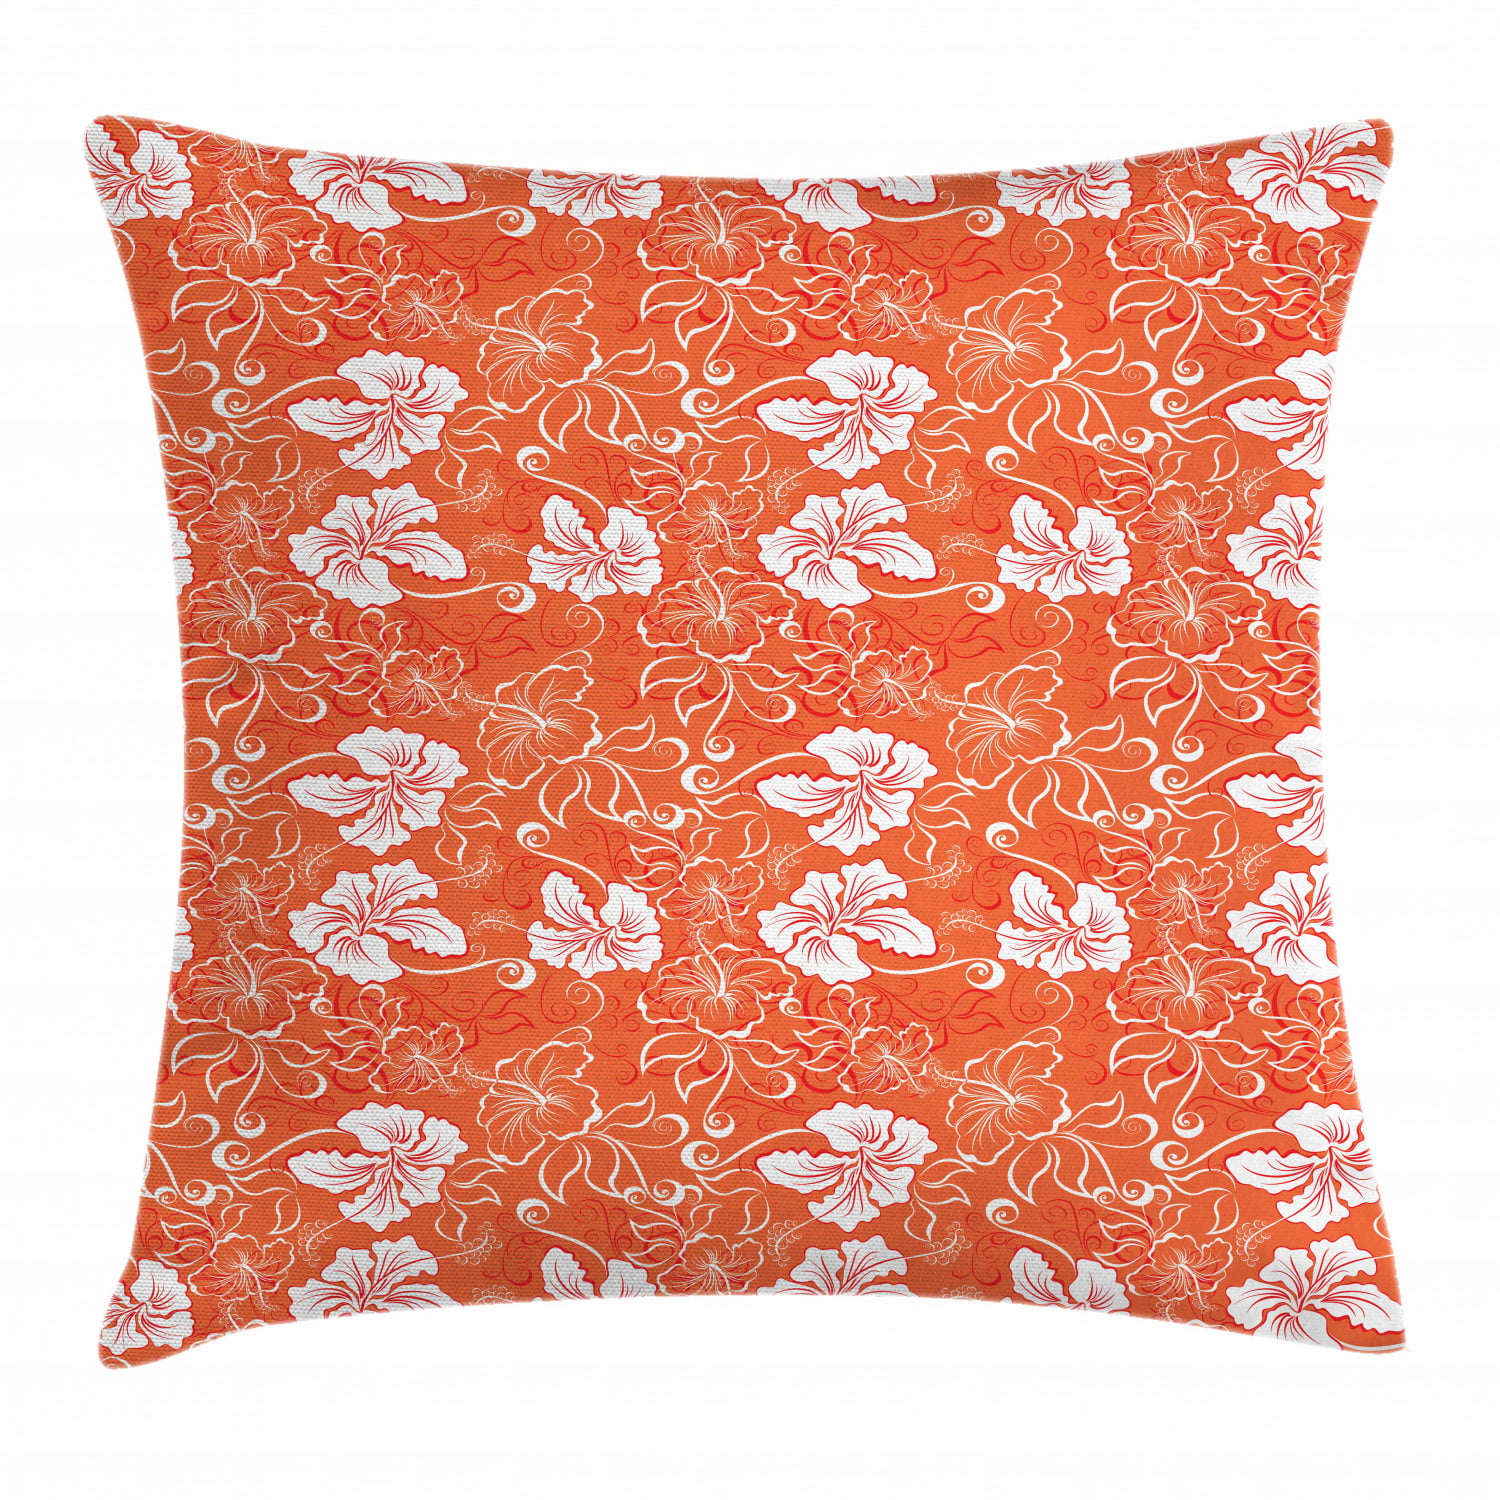 Flowershave357 One Throw Pillow Cover Decorative Pillow Cover Tropical Pillow Cover Floral Decor Hawaiian Decor Orange Pillow Cover Sofa Pillow 